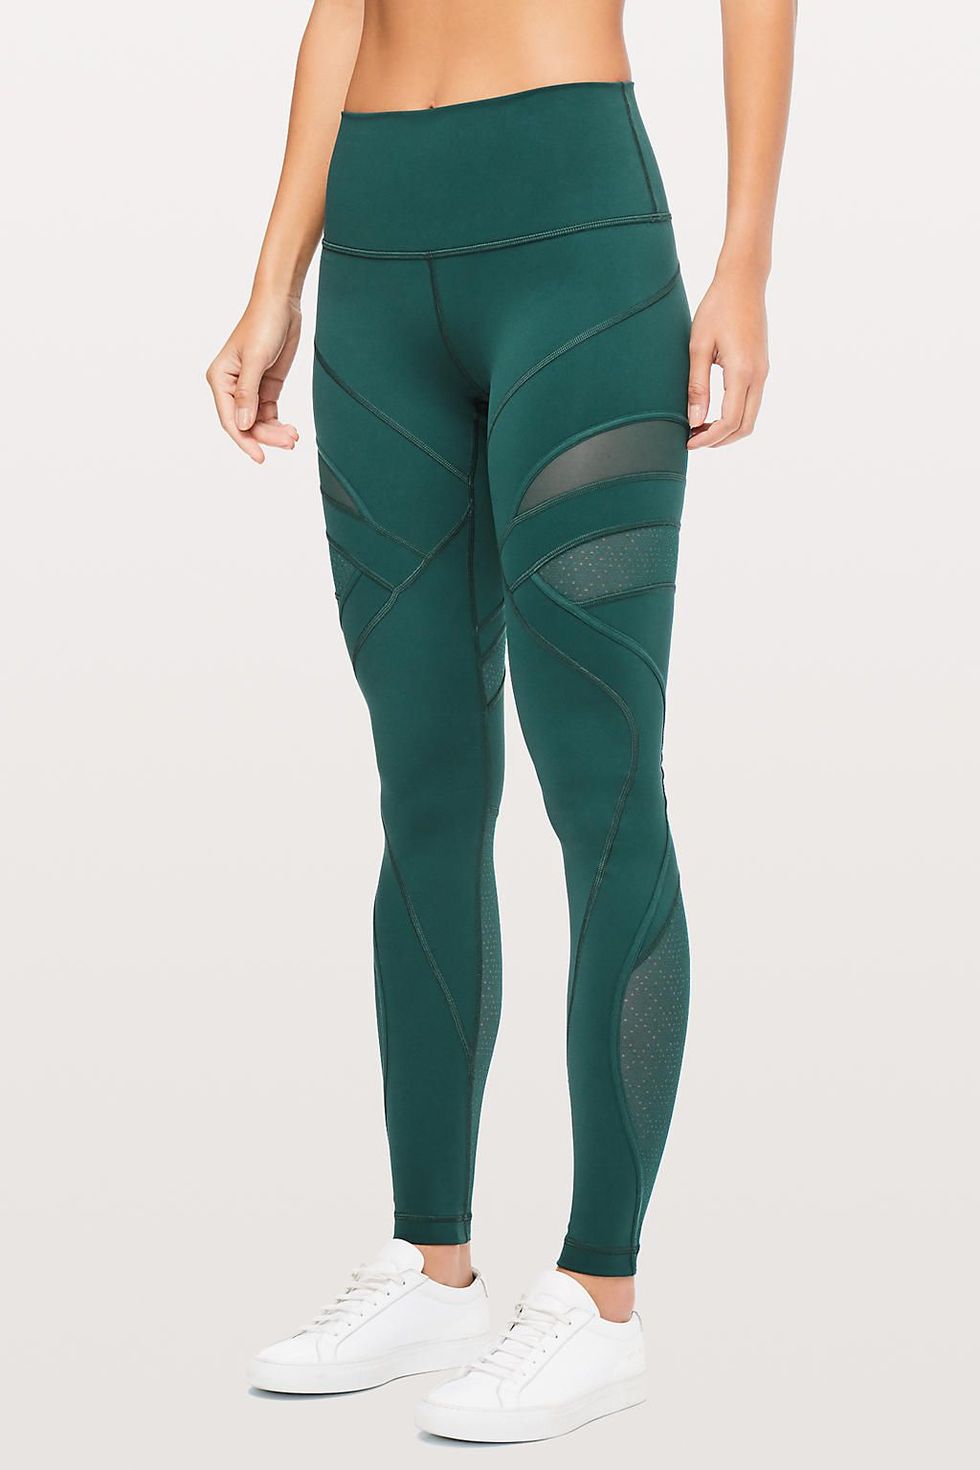 Vs Total Knockout Mid-Rise Perforated Legging